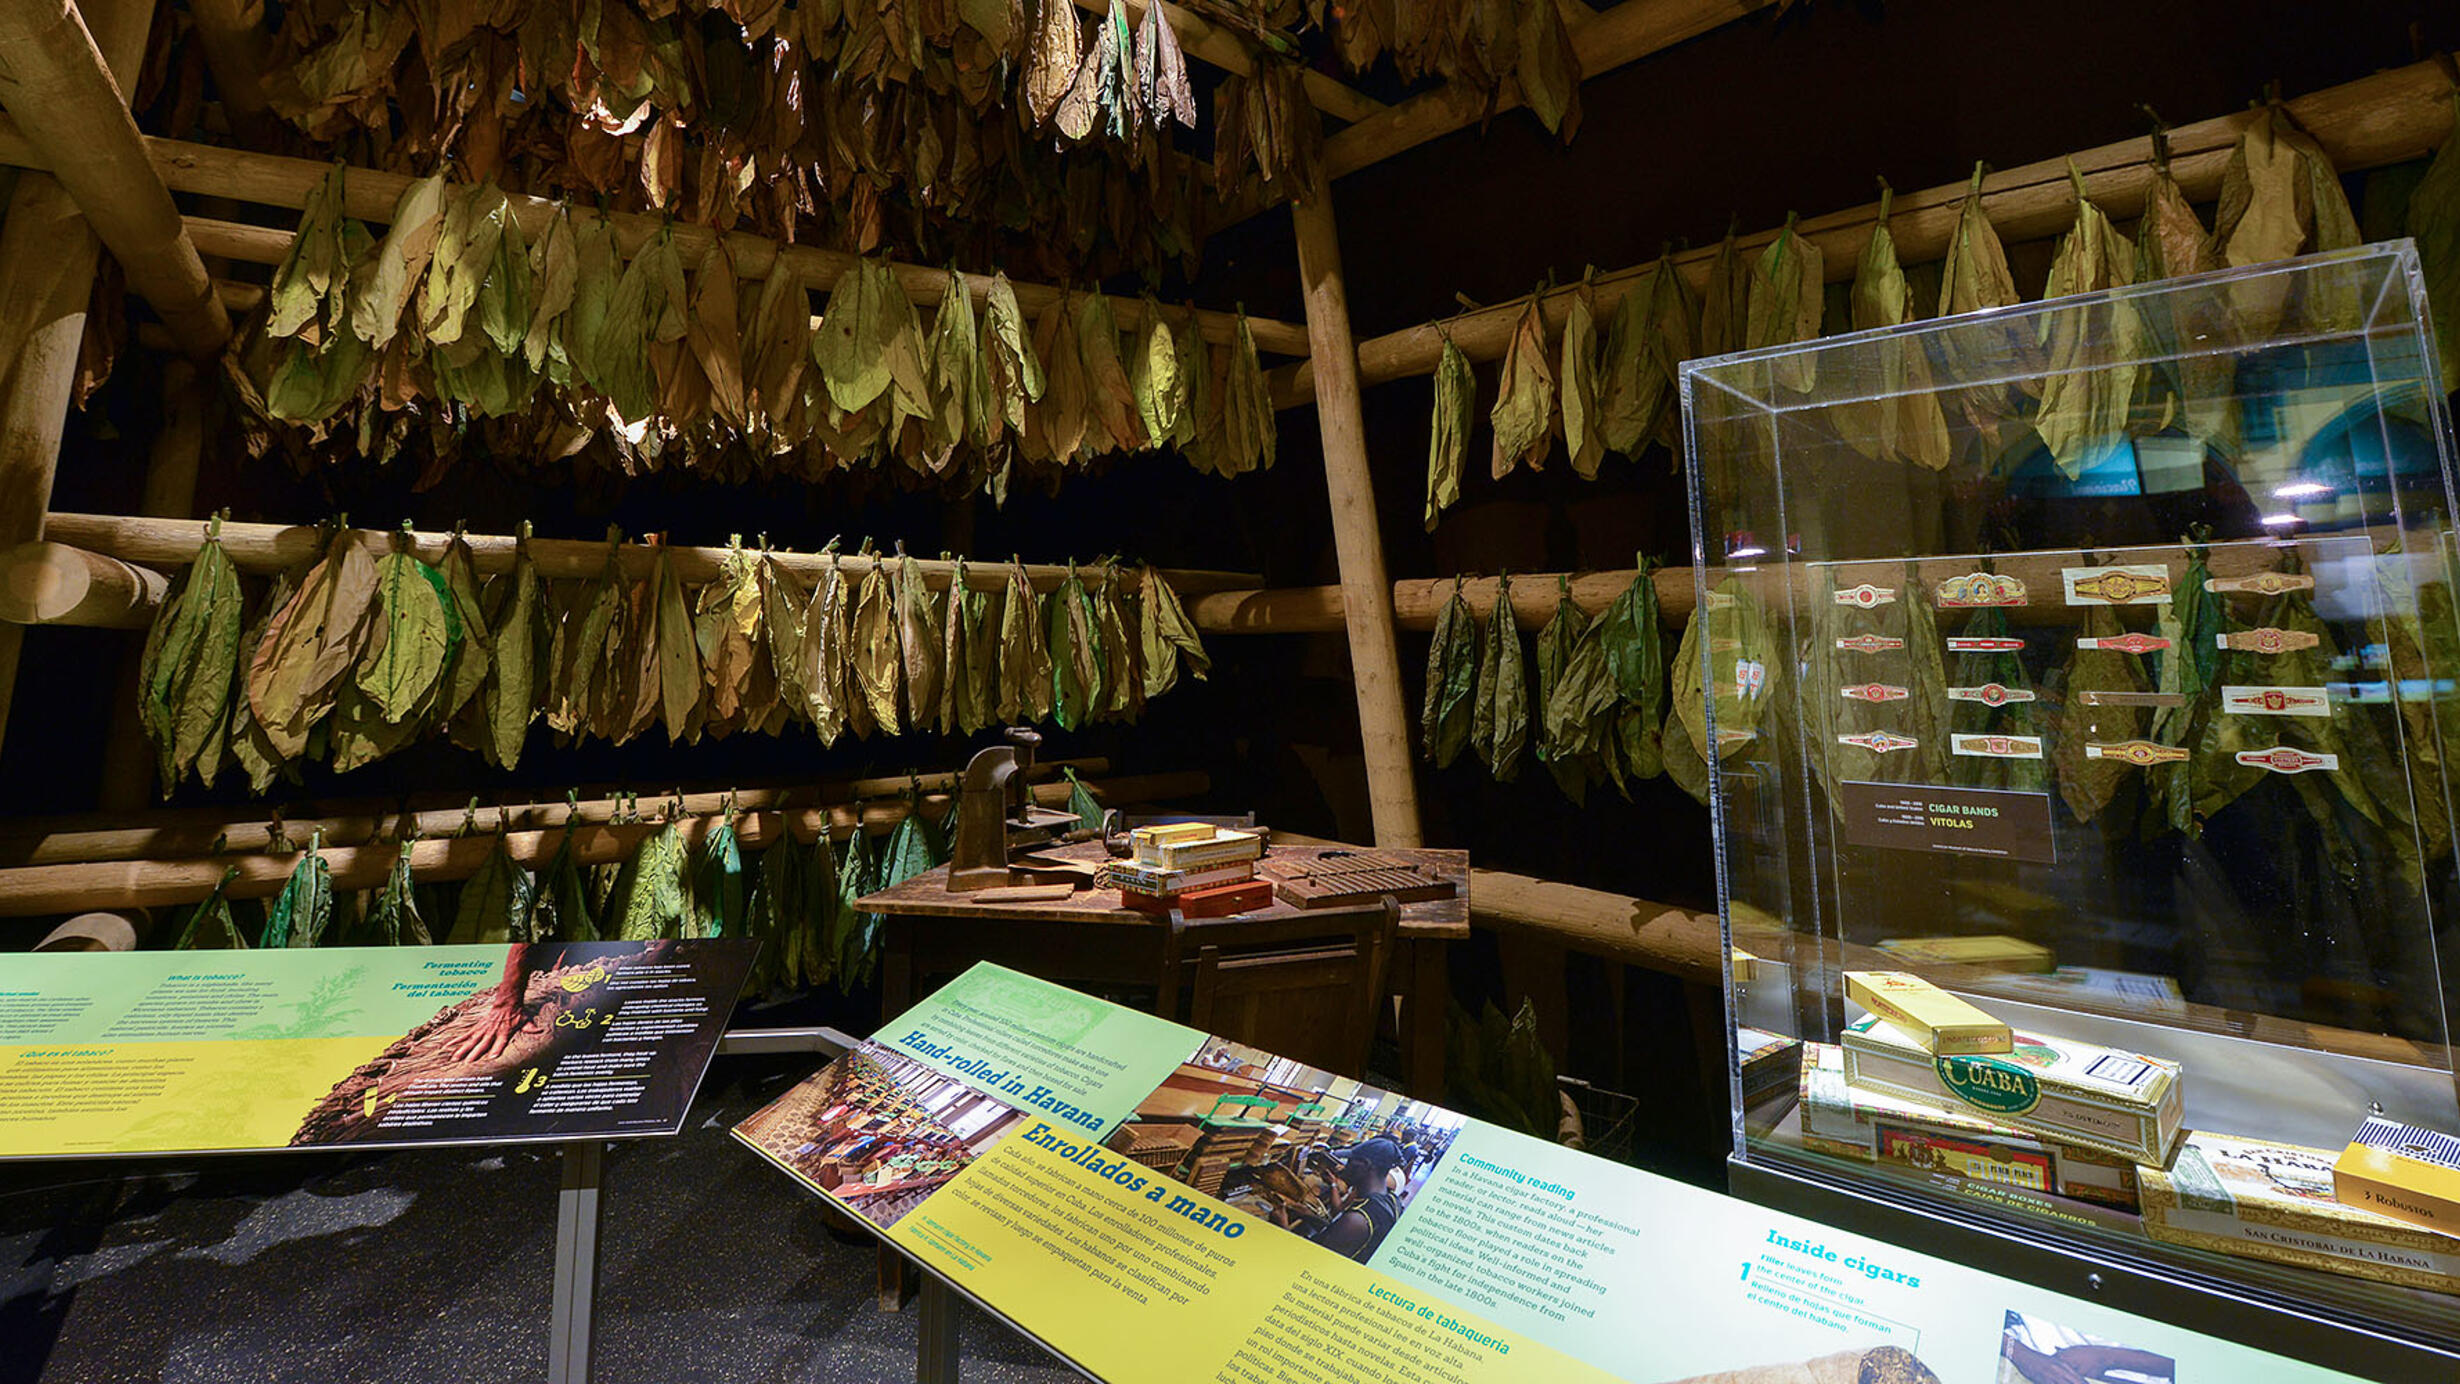 Display shows tobacco leaves strung along wooden poles, as well as cuban cigar boxes and labels.